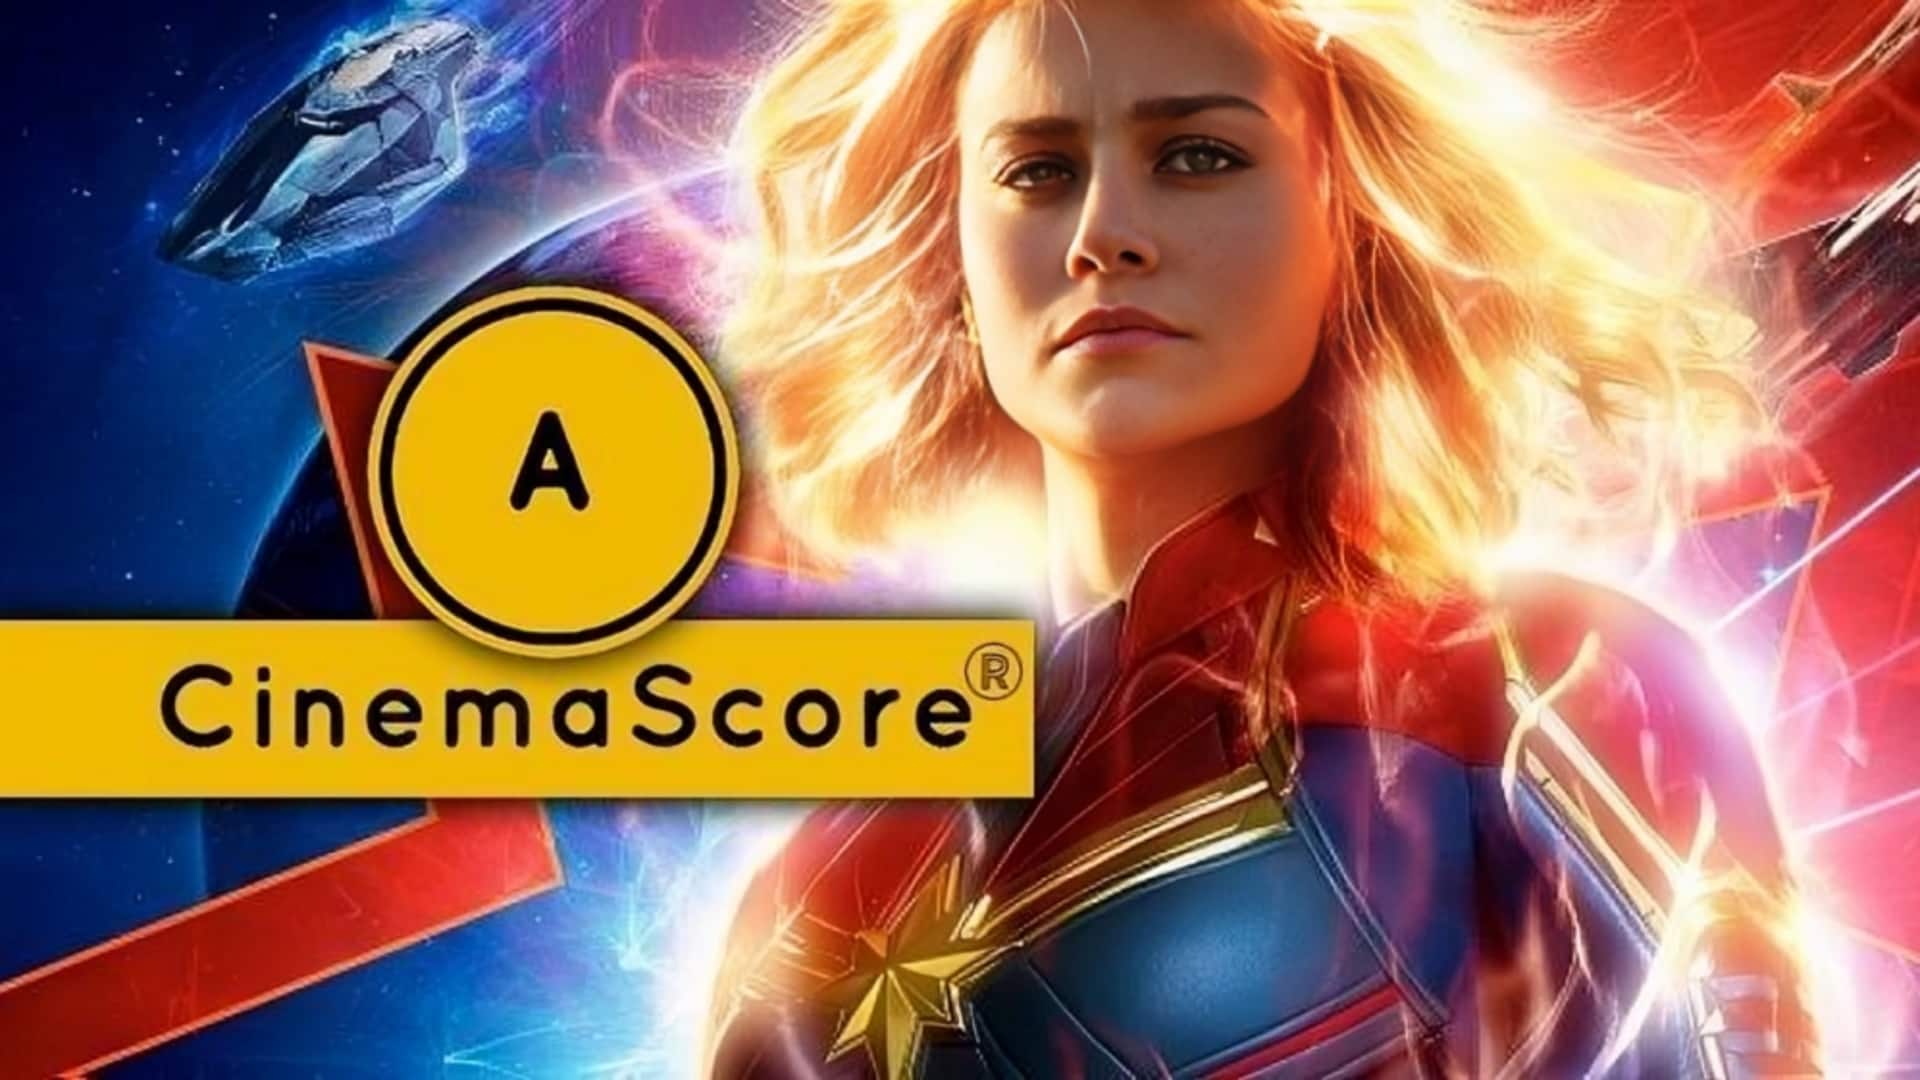 Explainer: Hollywood rating system CinemaScore, ratings of recent films